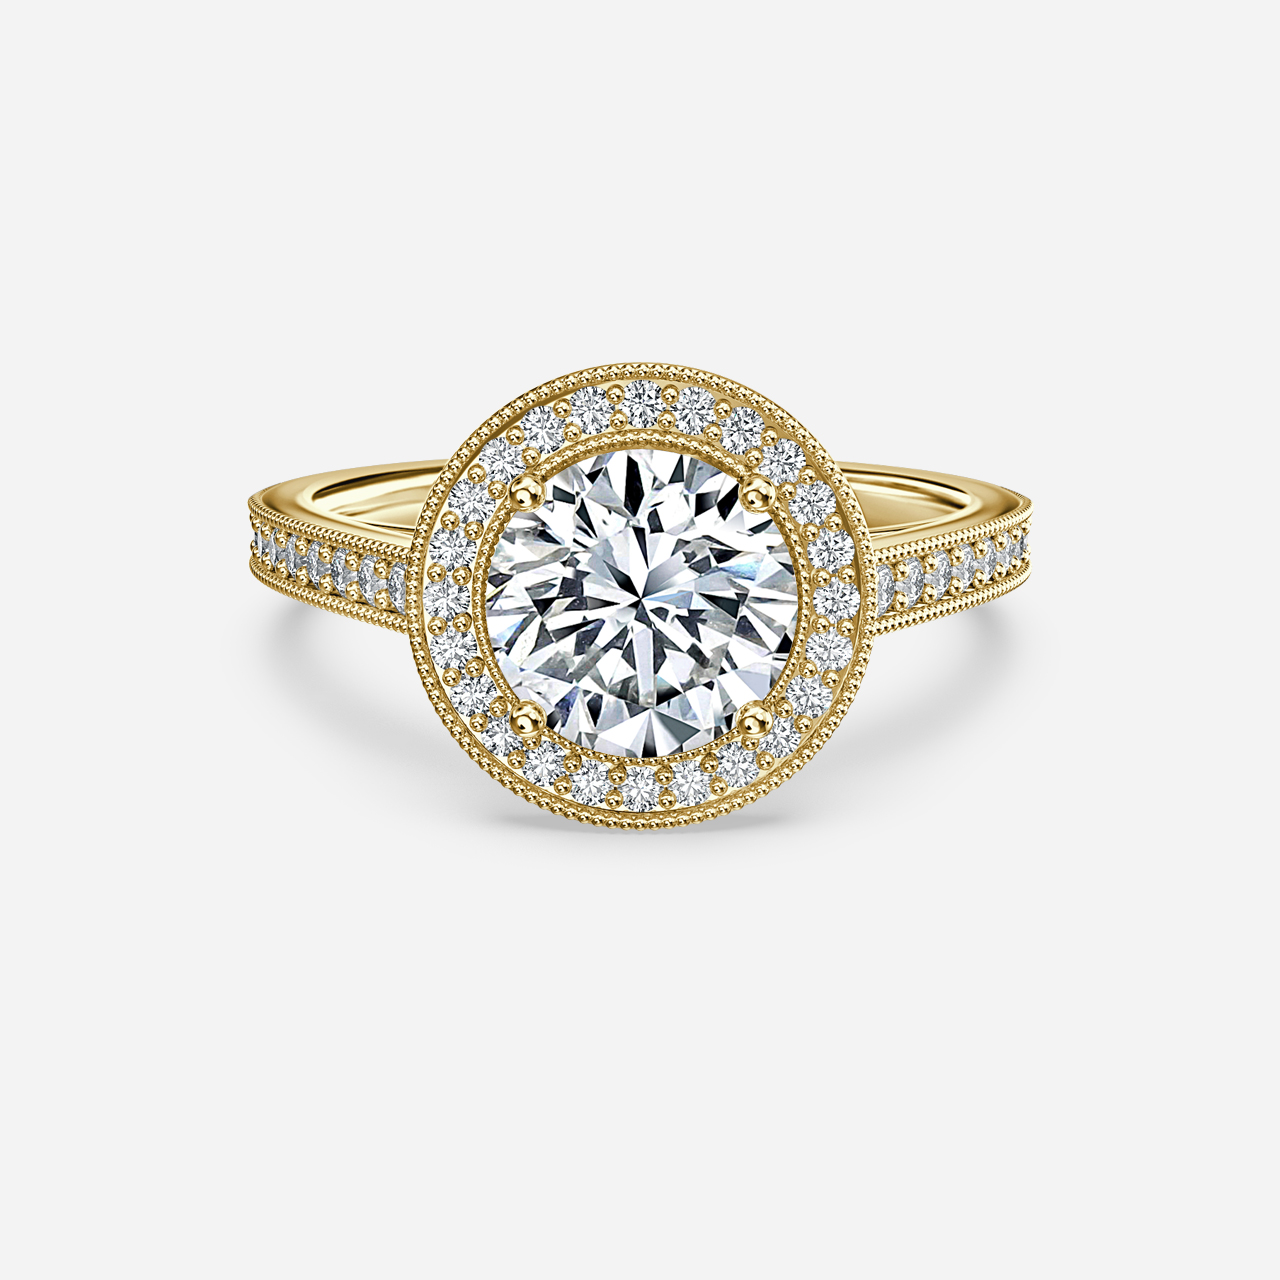 Vintage inspired engagement rings